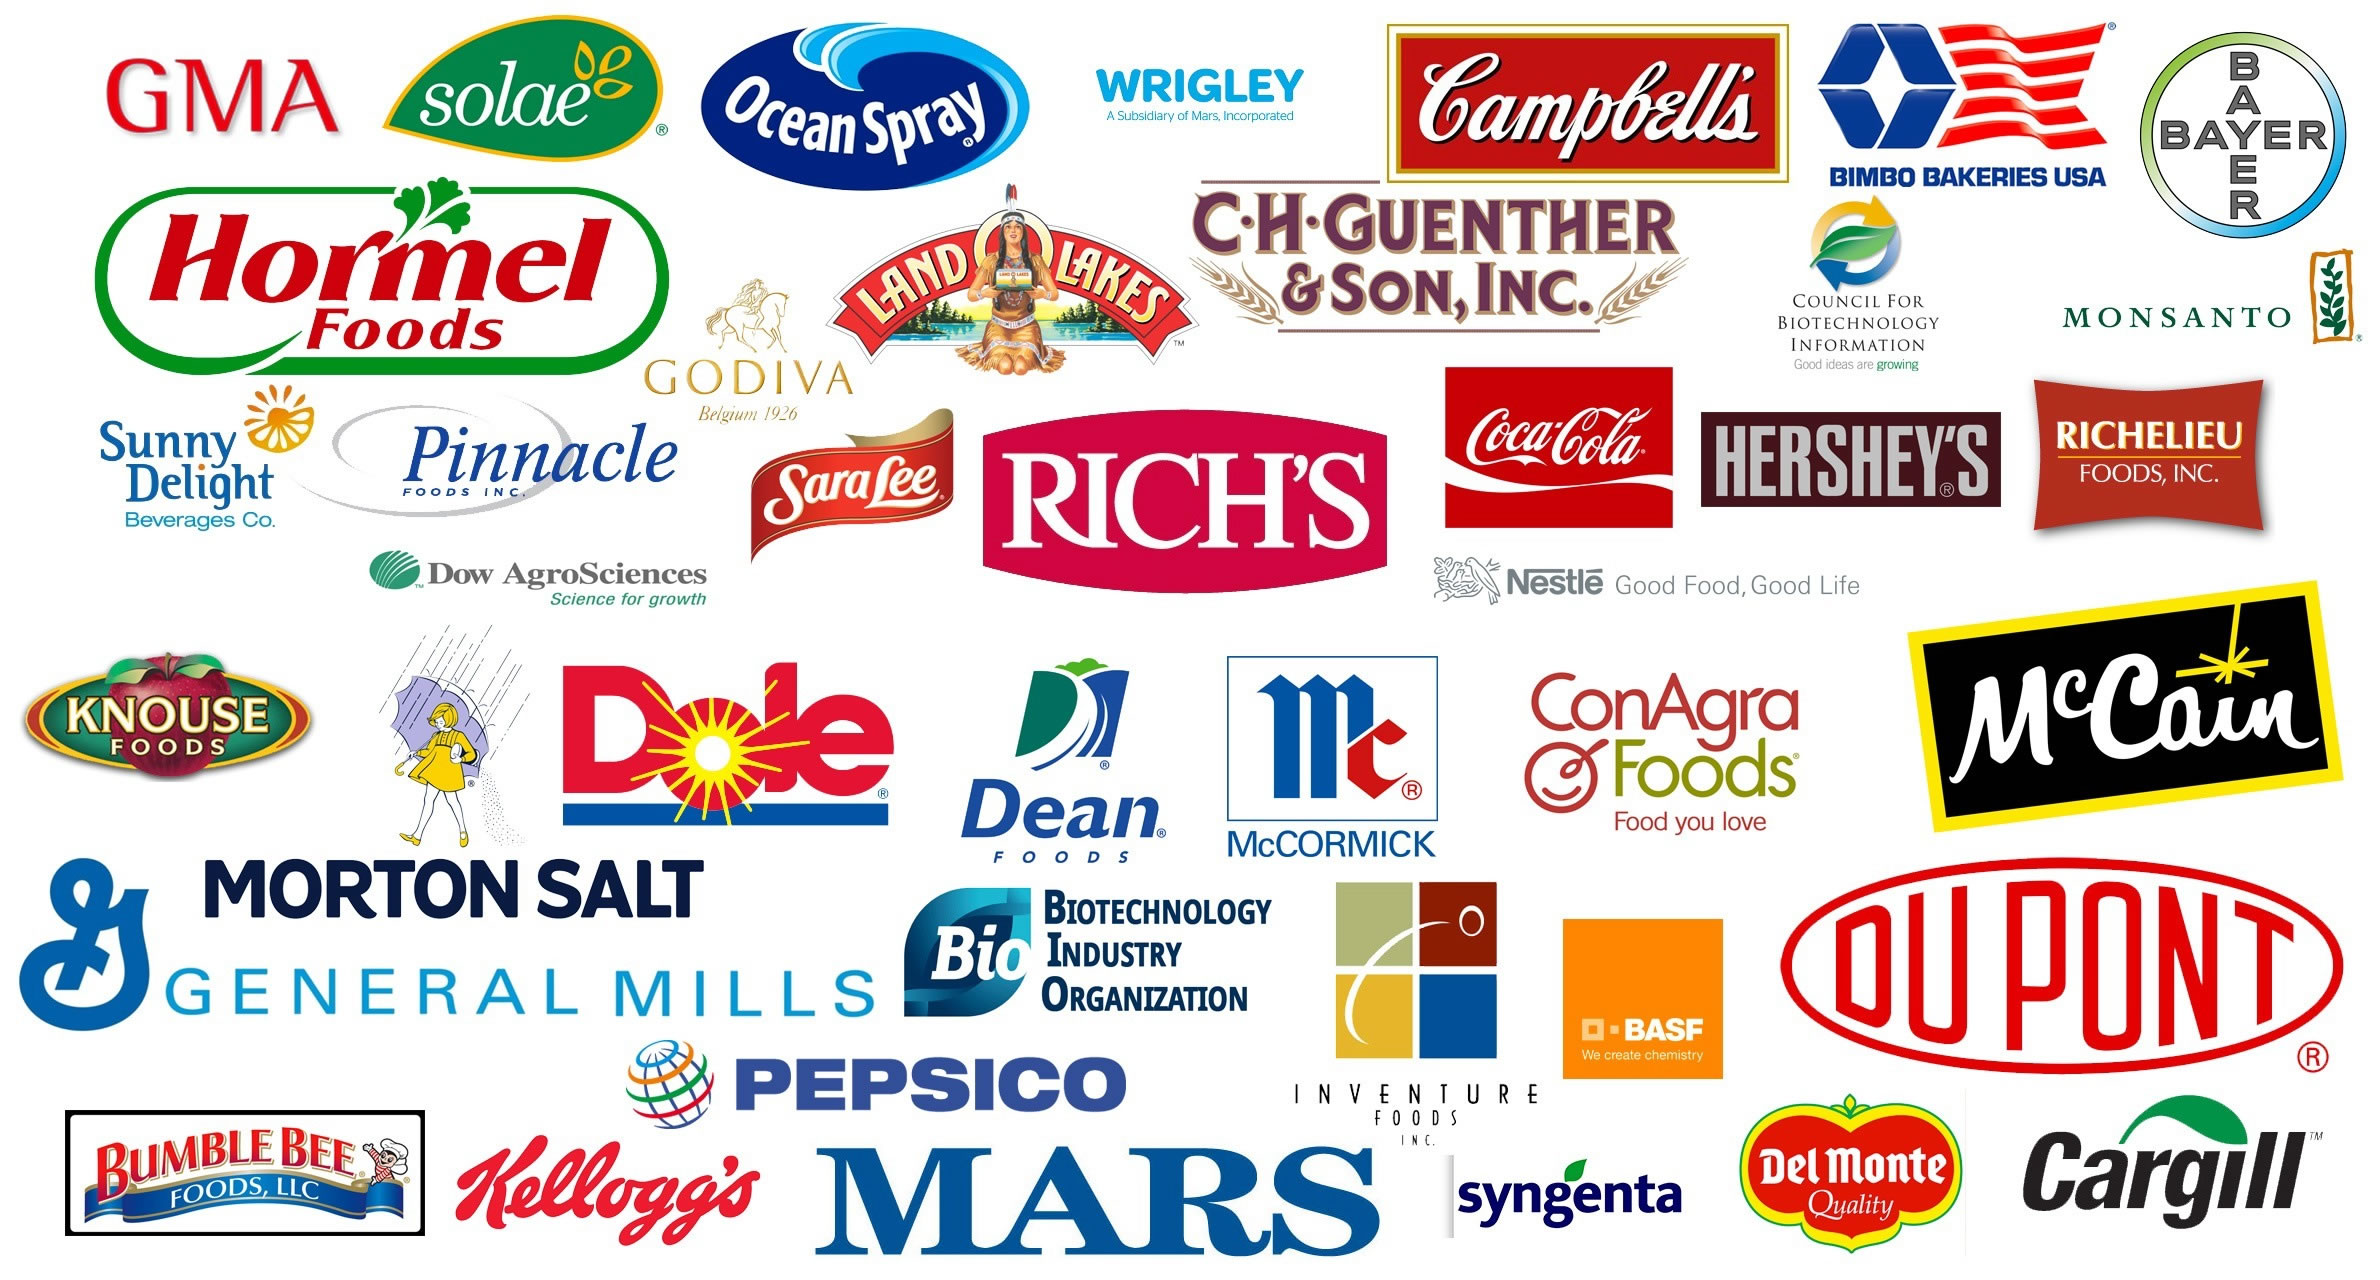 Brands formerly associated with the Grocery Manufacturers Association